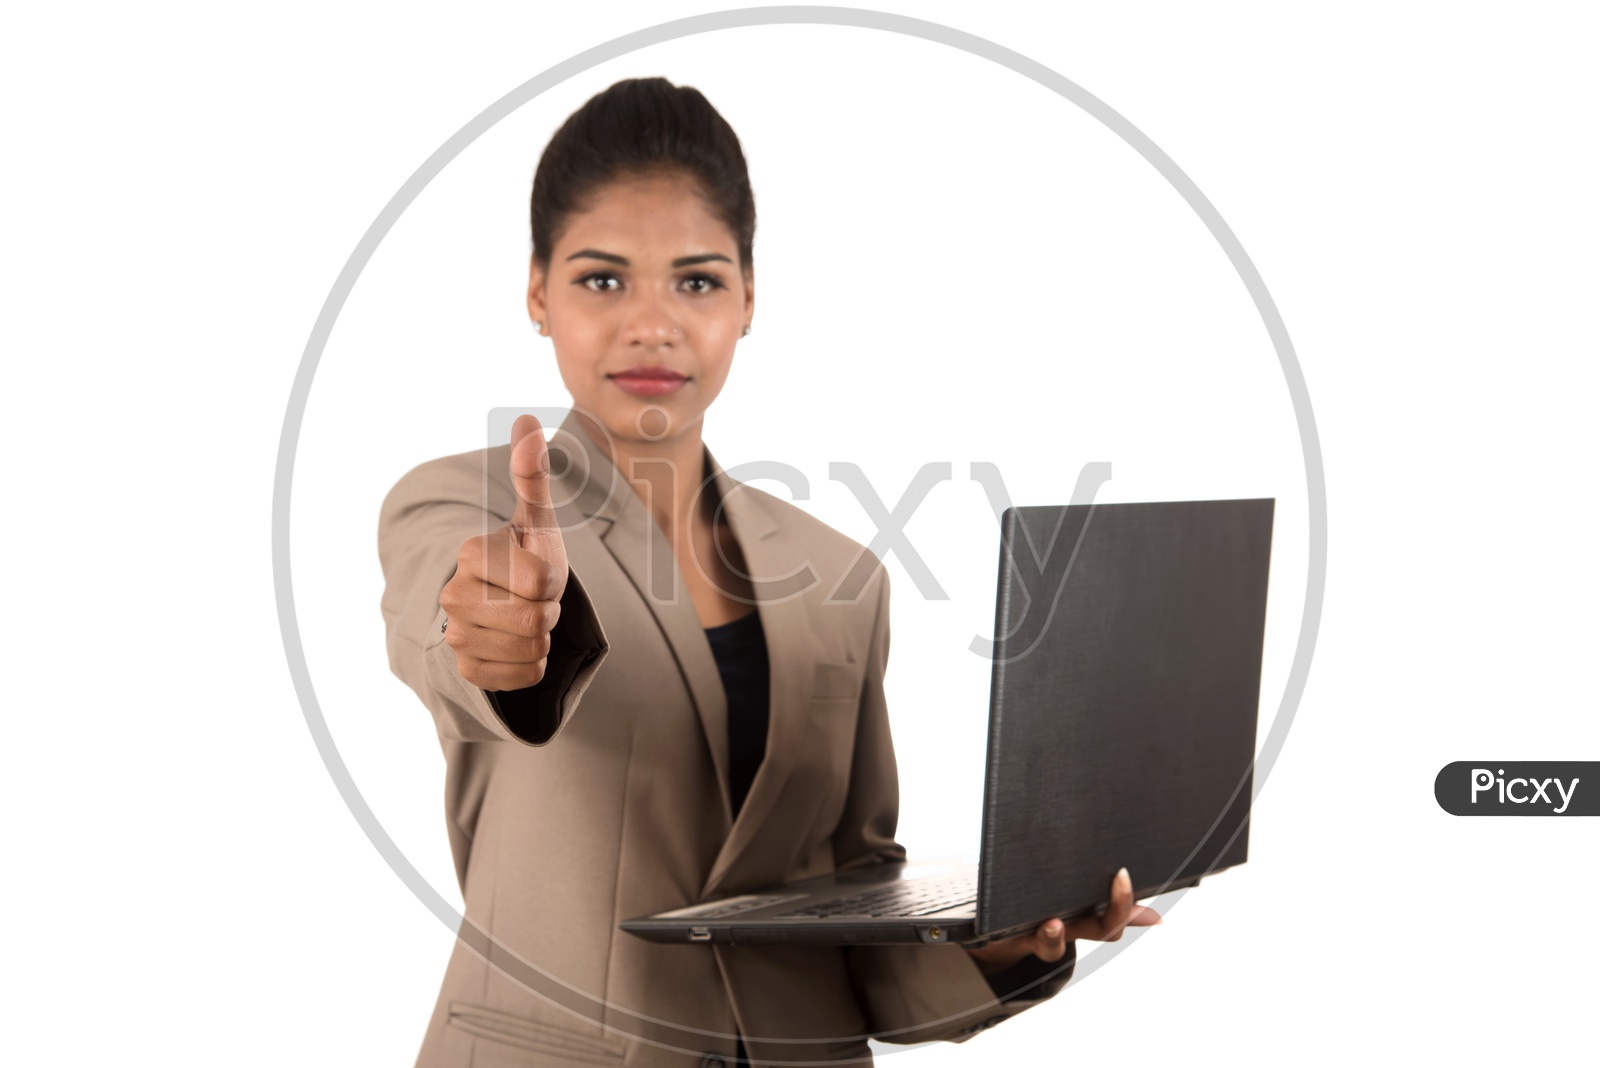 Young Indian business woman with a laptop giving a thumbs up sign